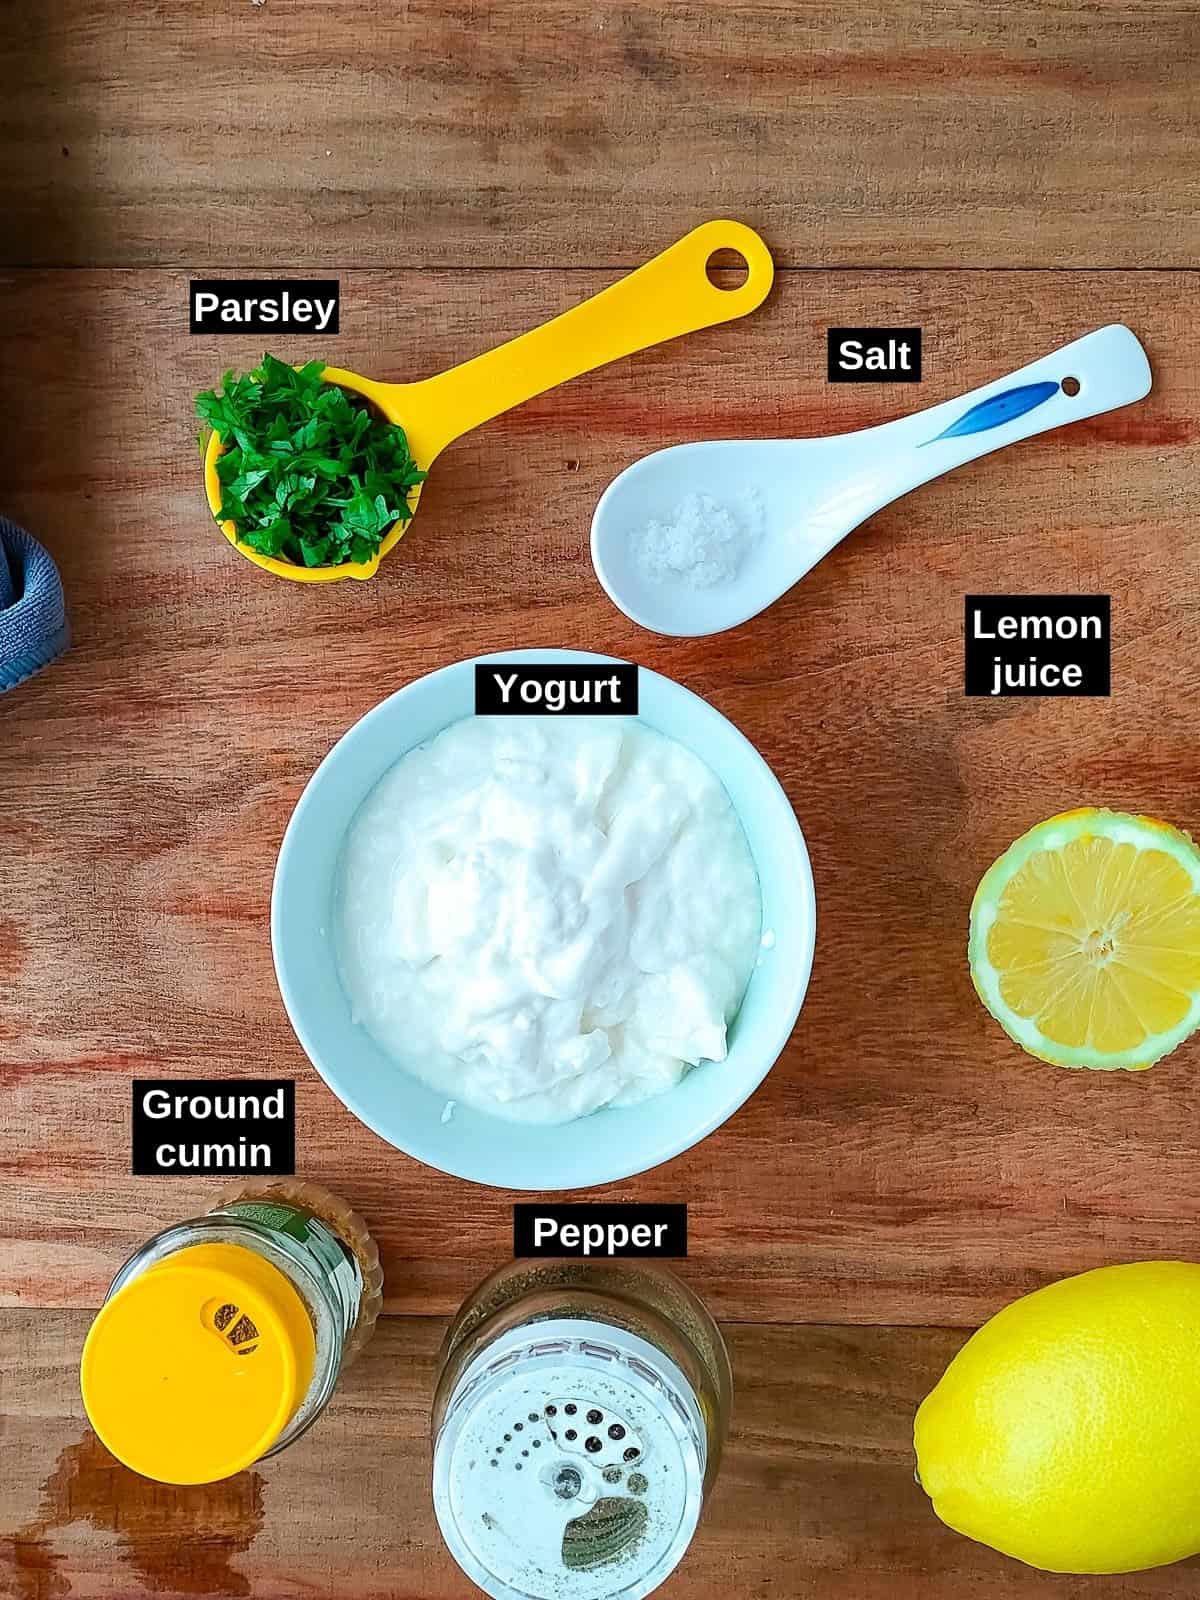 Labelled ingredients to make yogurt sauce for crumb-topped baked fish.